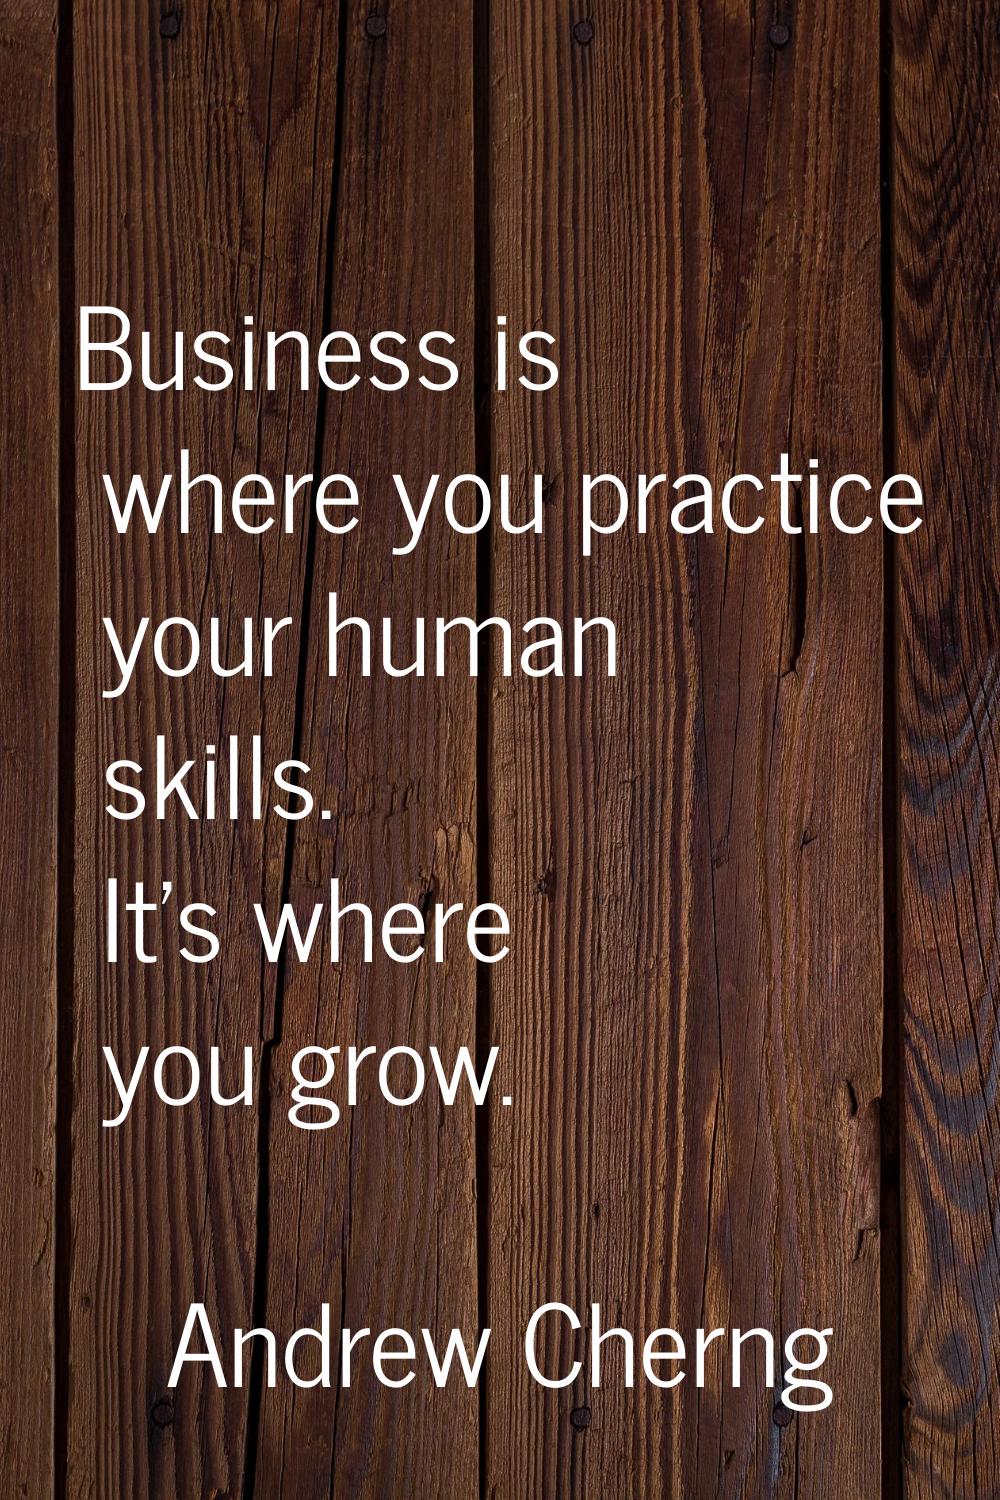 Business is where you practice your human skills. It's where you grow.